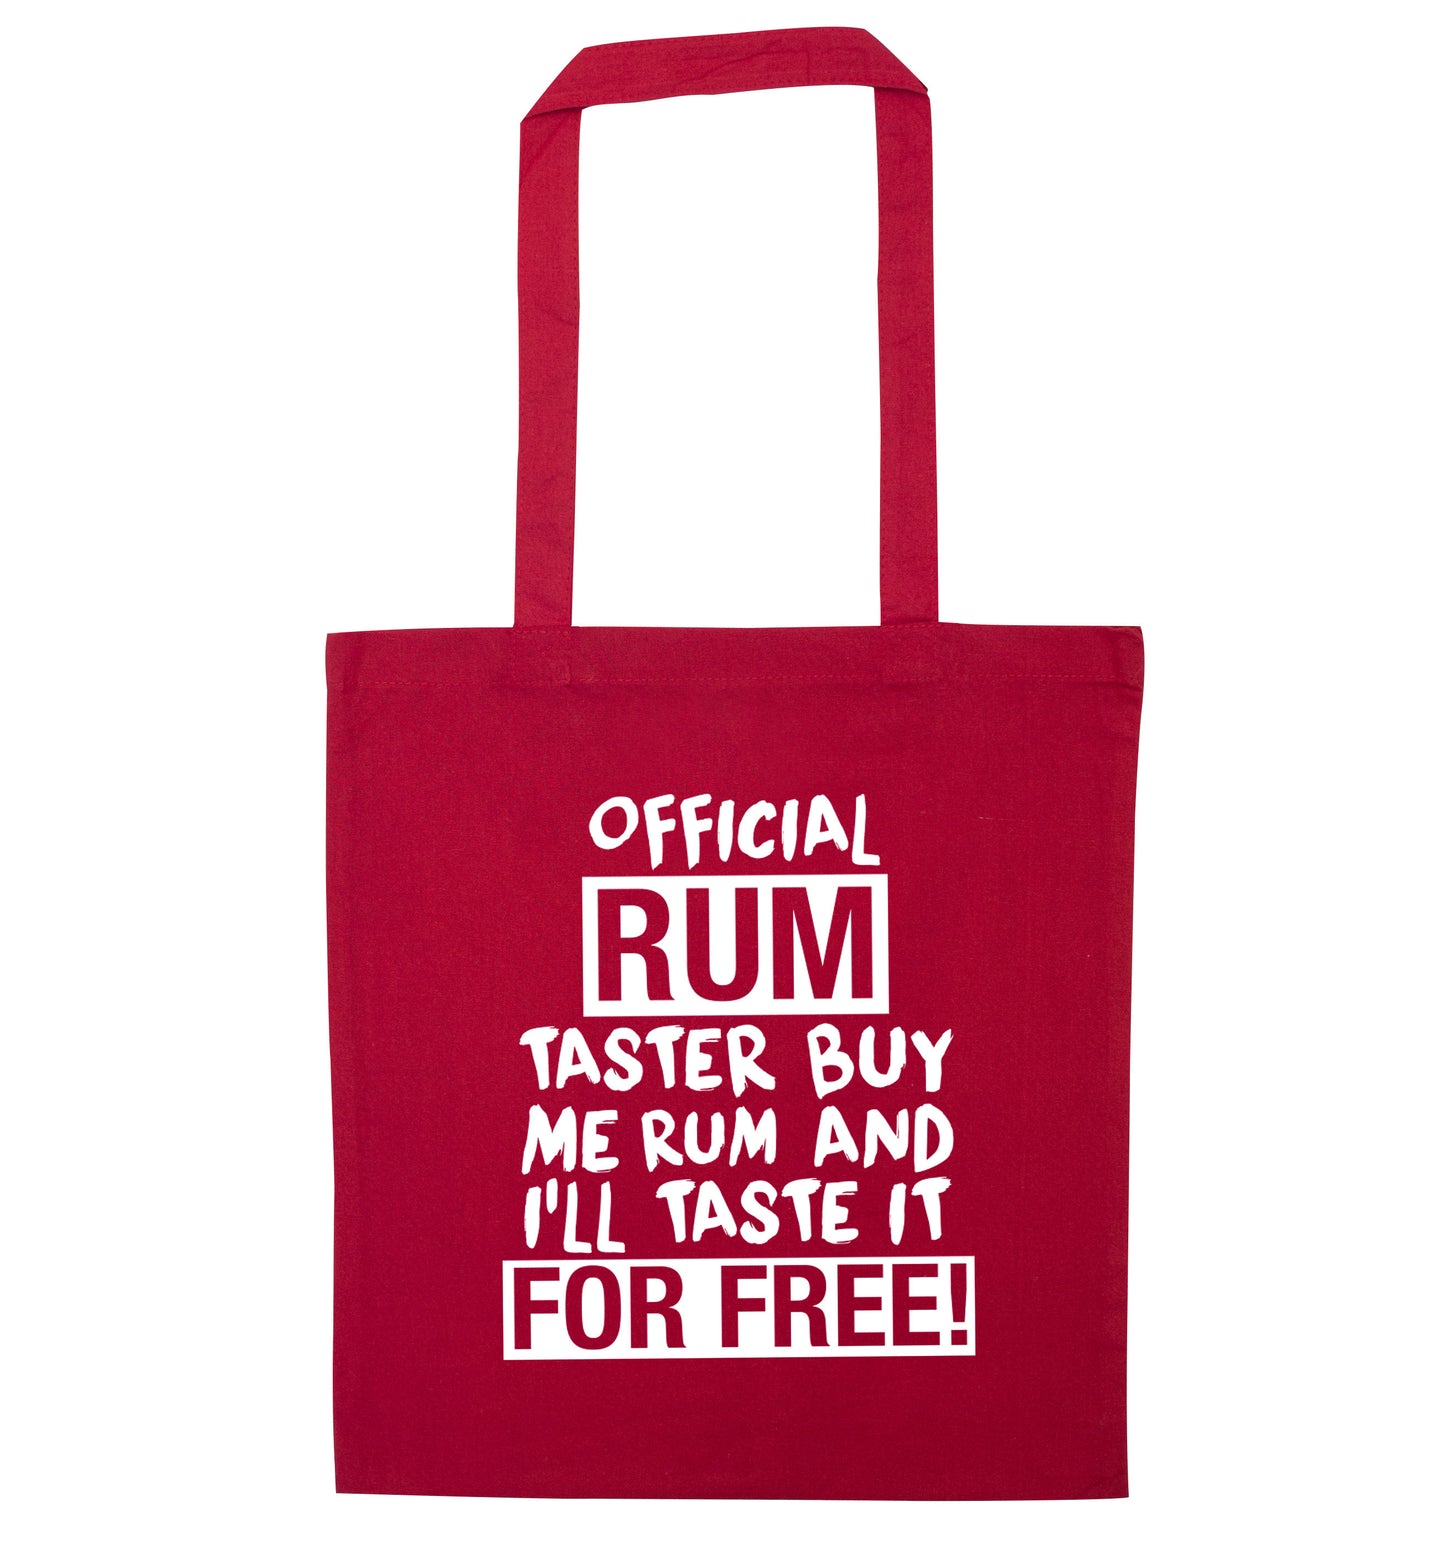 Official rum taster buy me rum and I'll taste it for free red tote bag